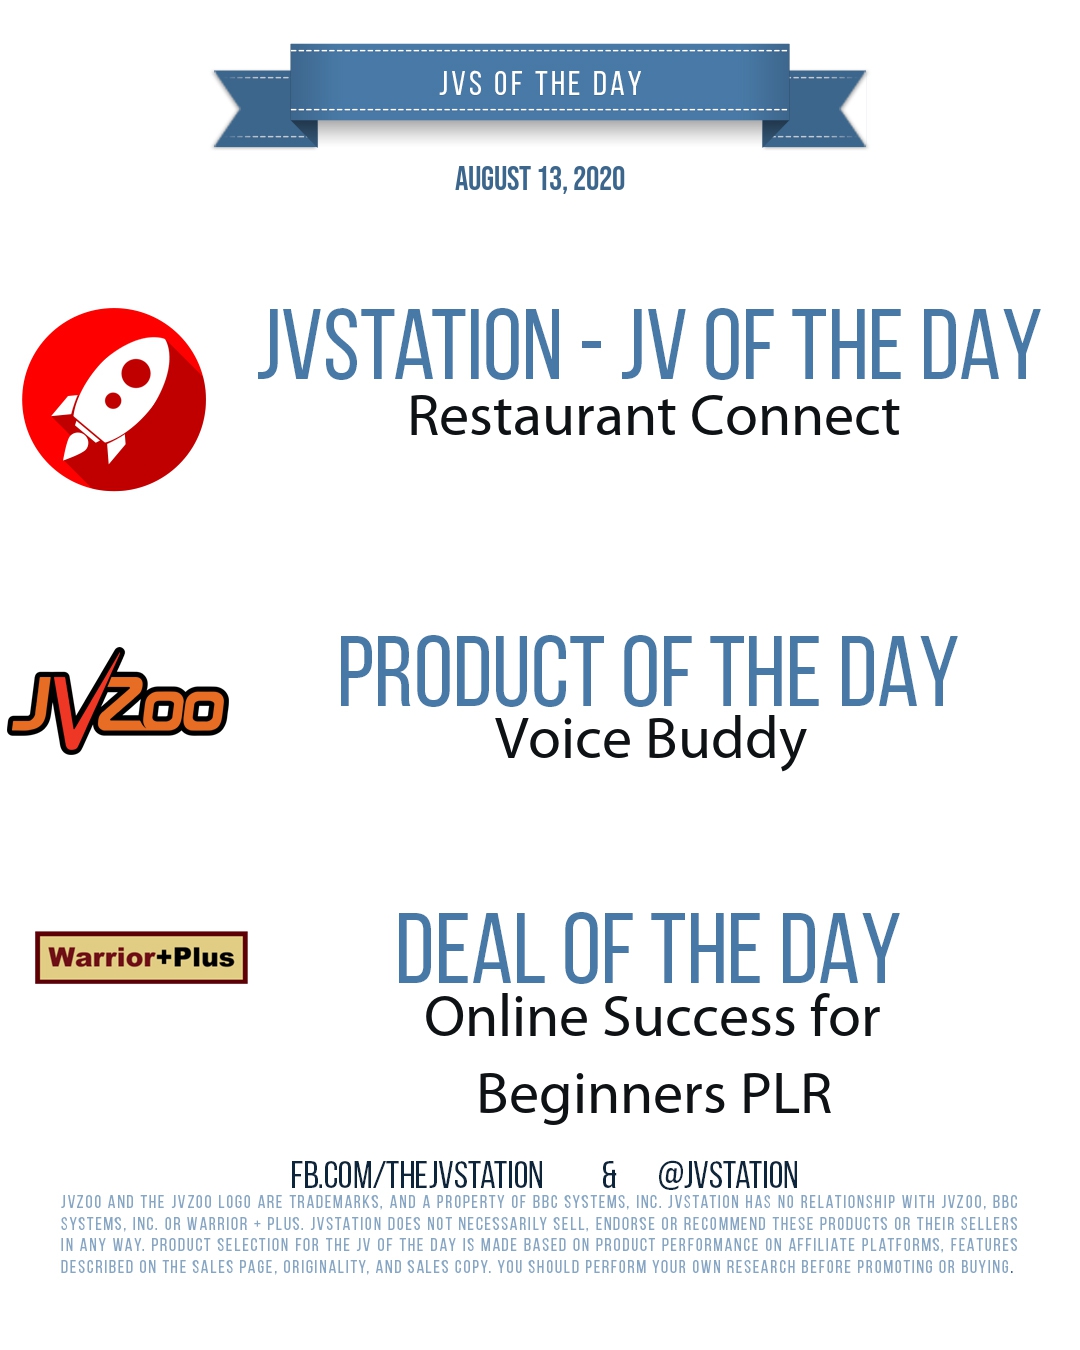 JVs of the day - August 13, 2020